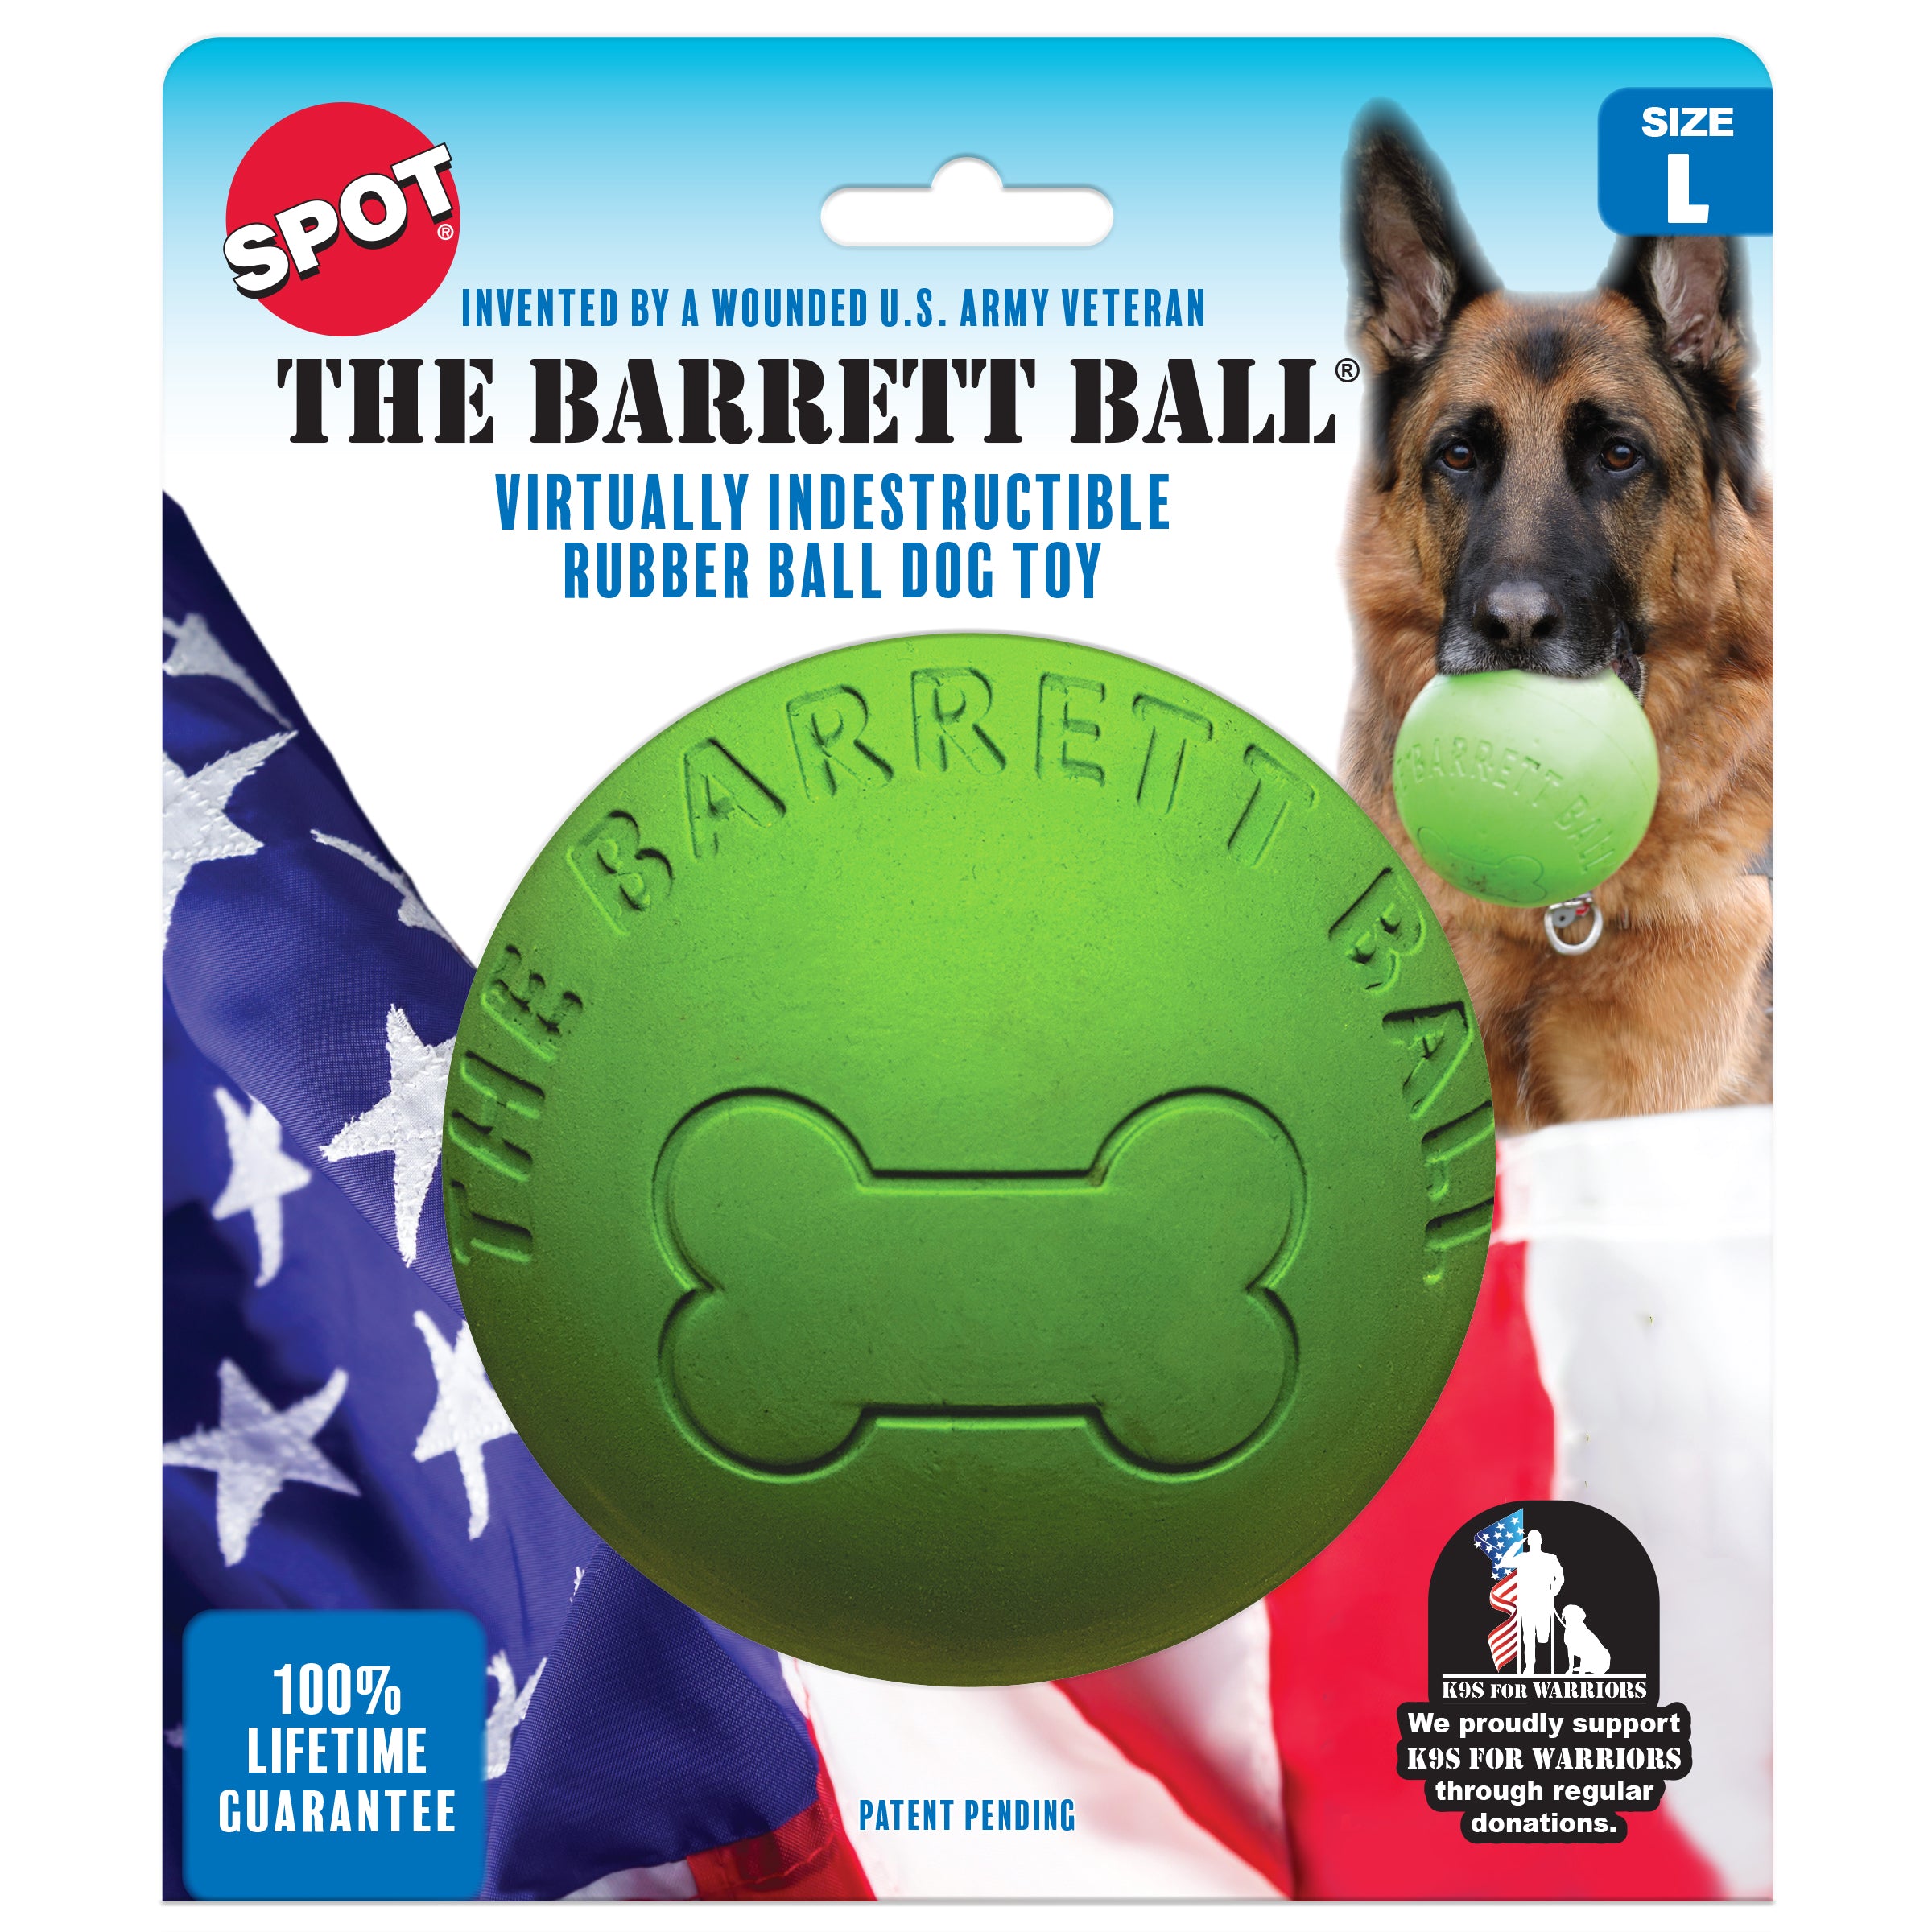 Voovpet Dog Ball Indestructible Strawberry Rubber Chew Treat